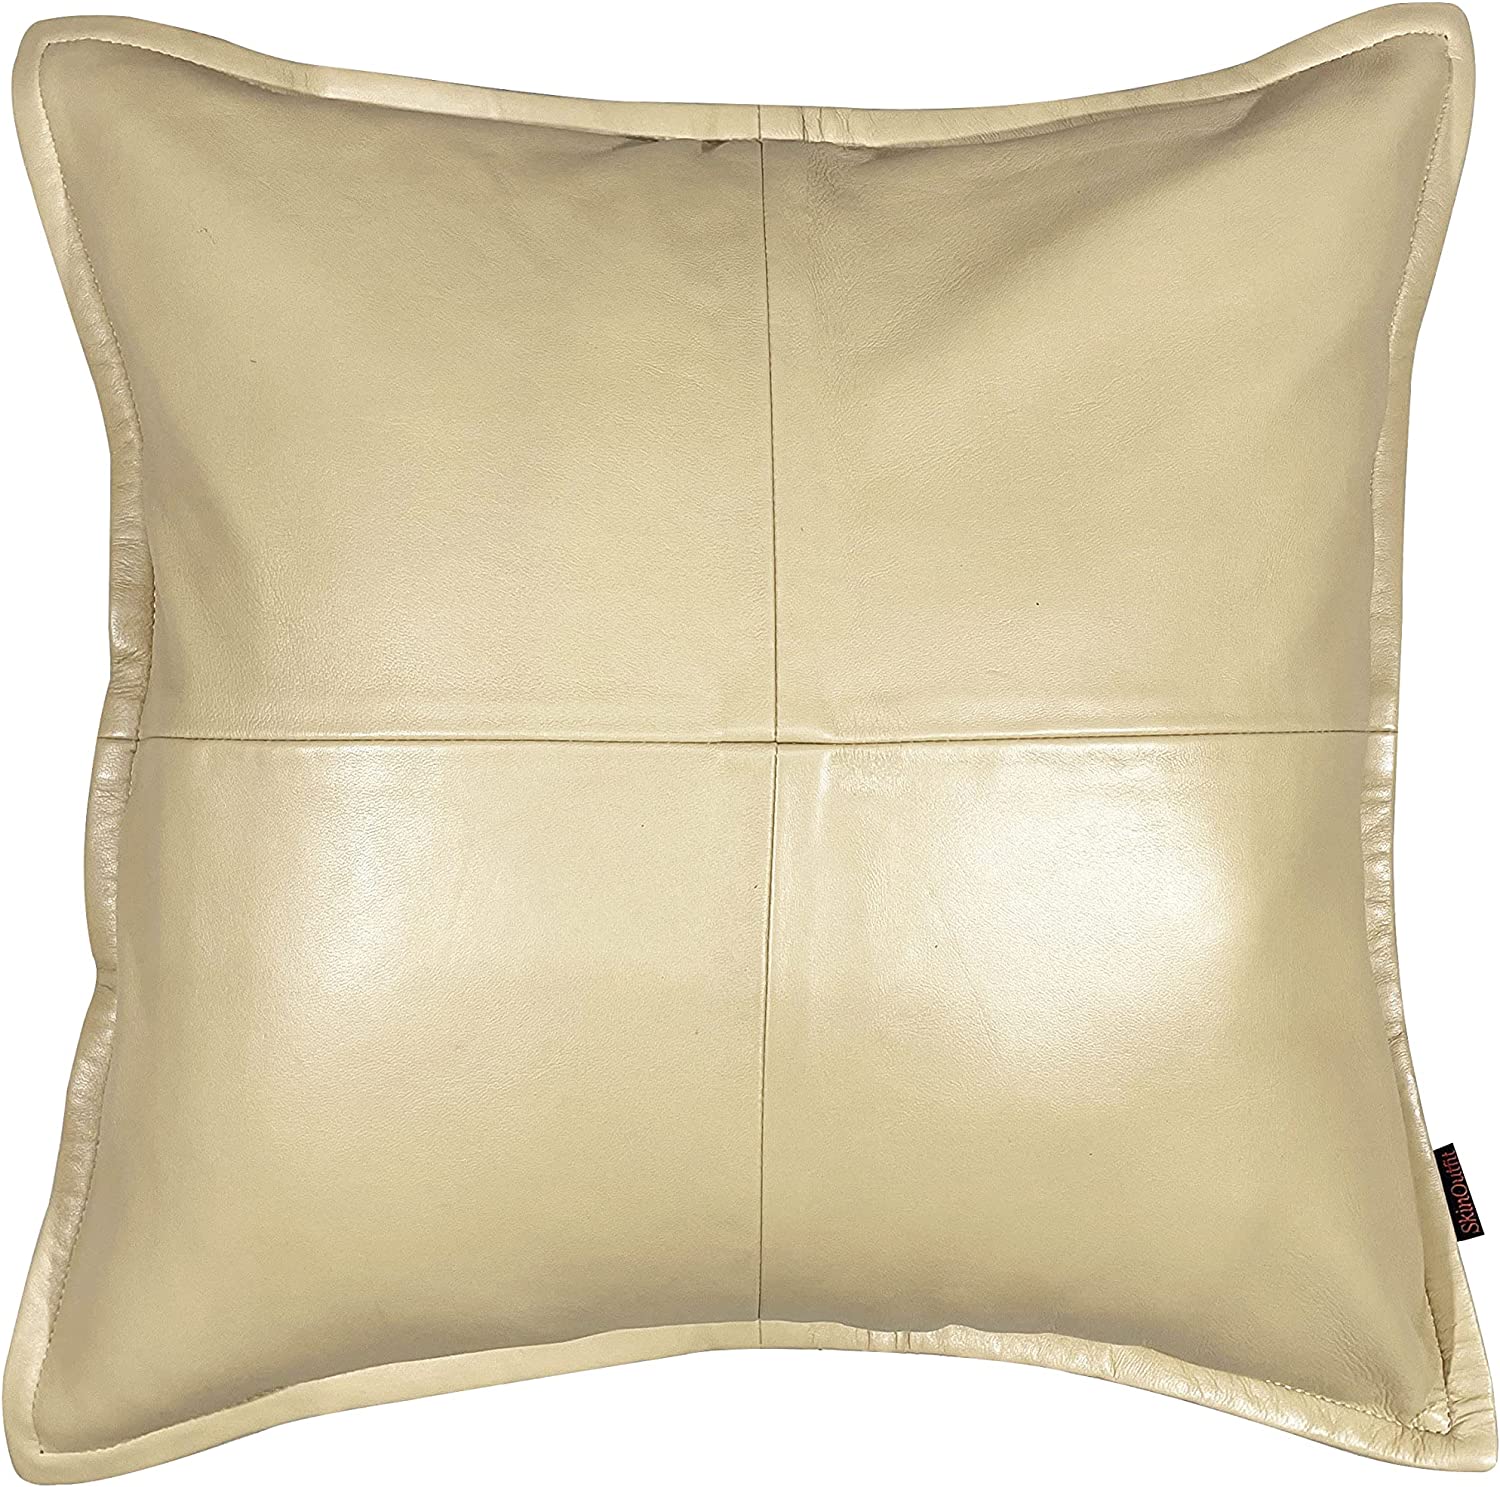 Genuine Leather Square Pillow Cover 21 SkinOutfit